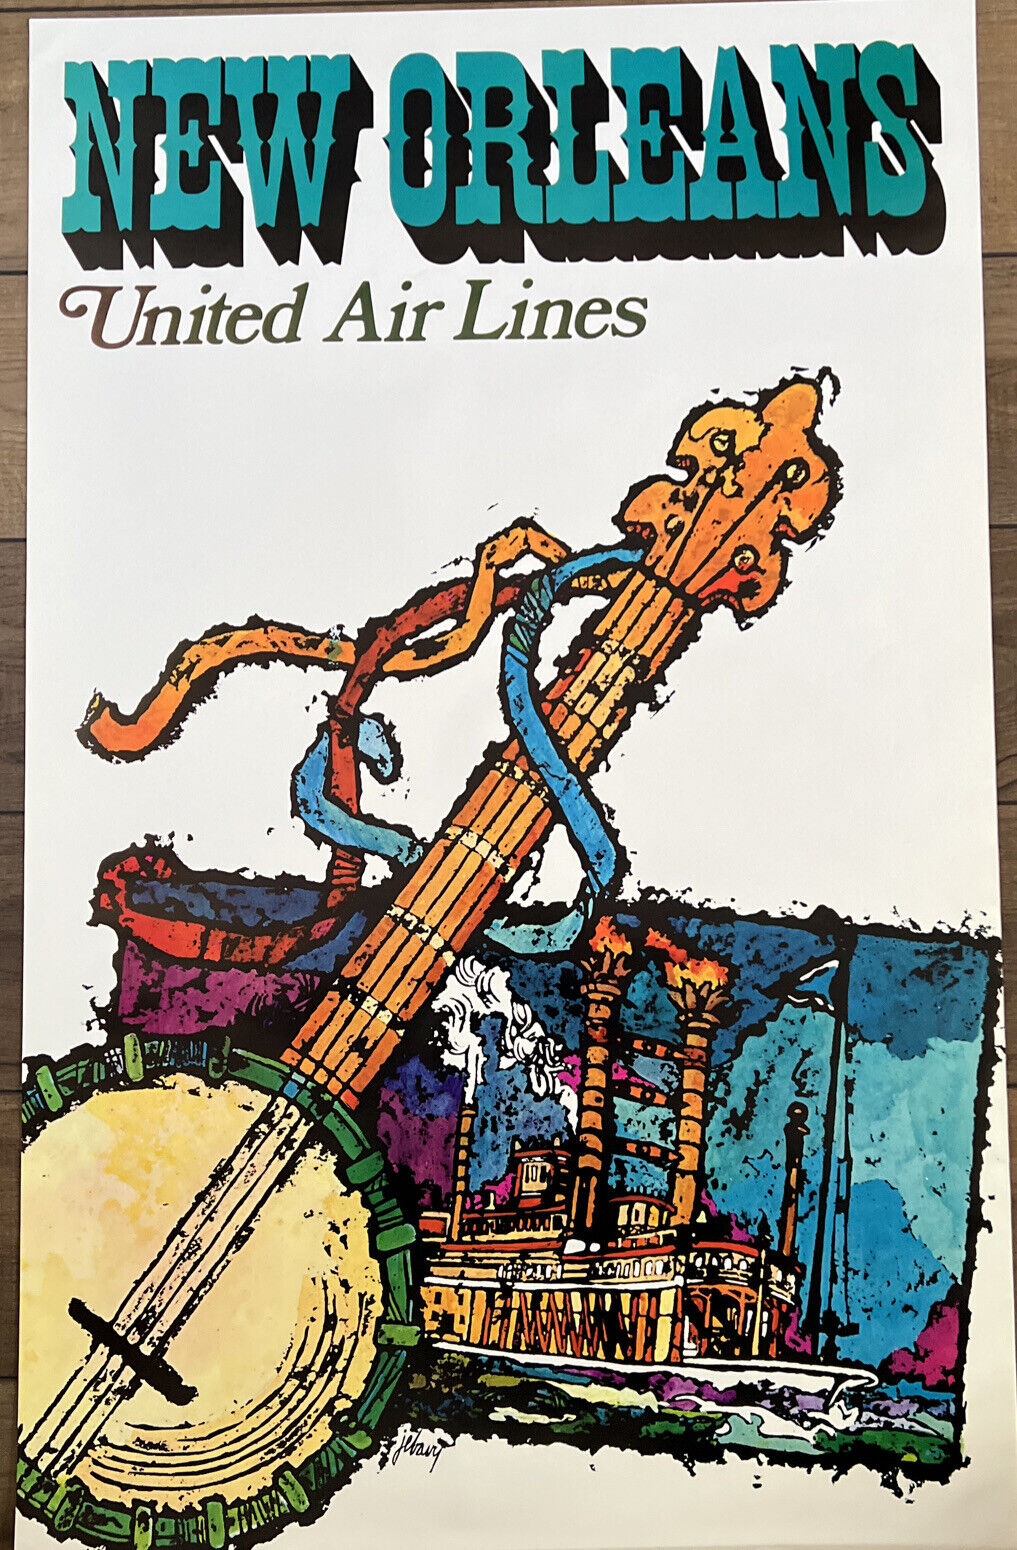 Vintage 1968 New Orleans United Airlines Promotional Travel Poster - New